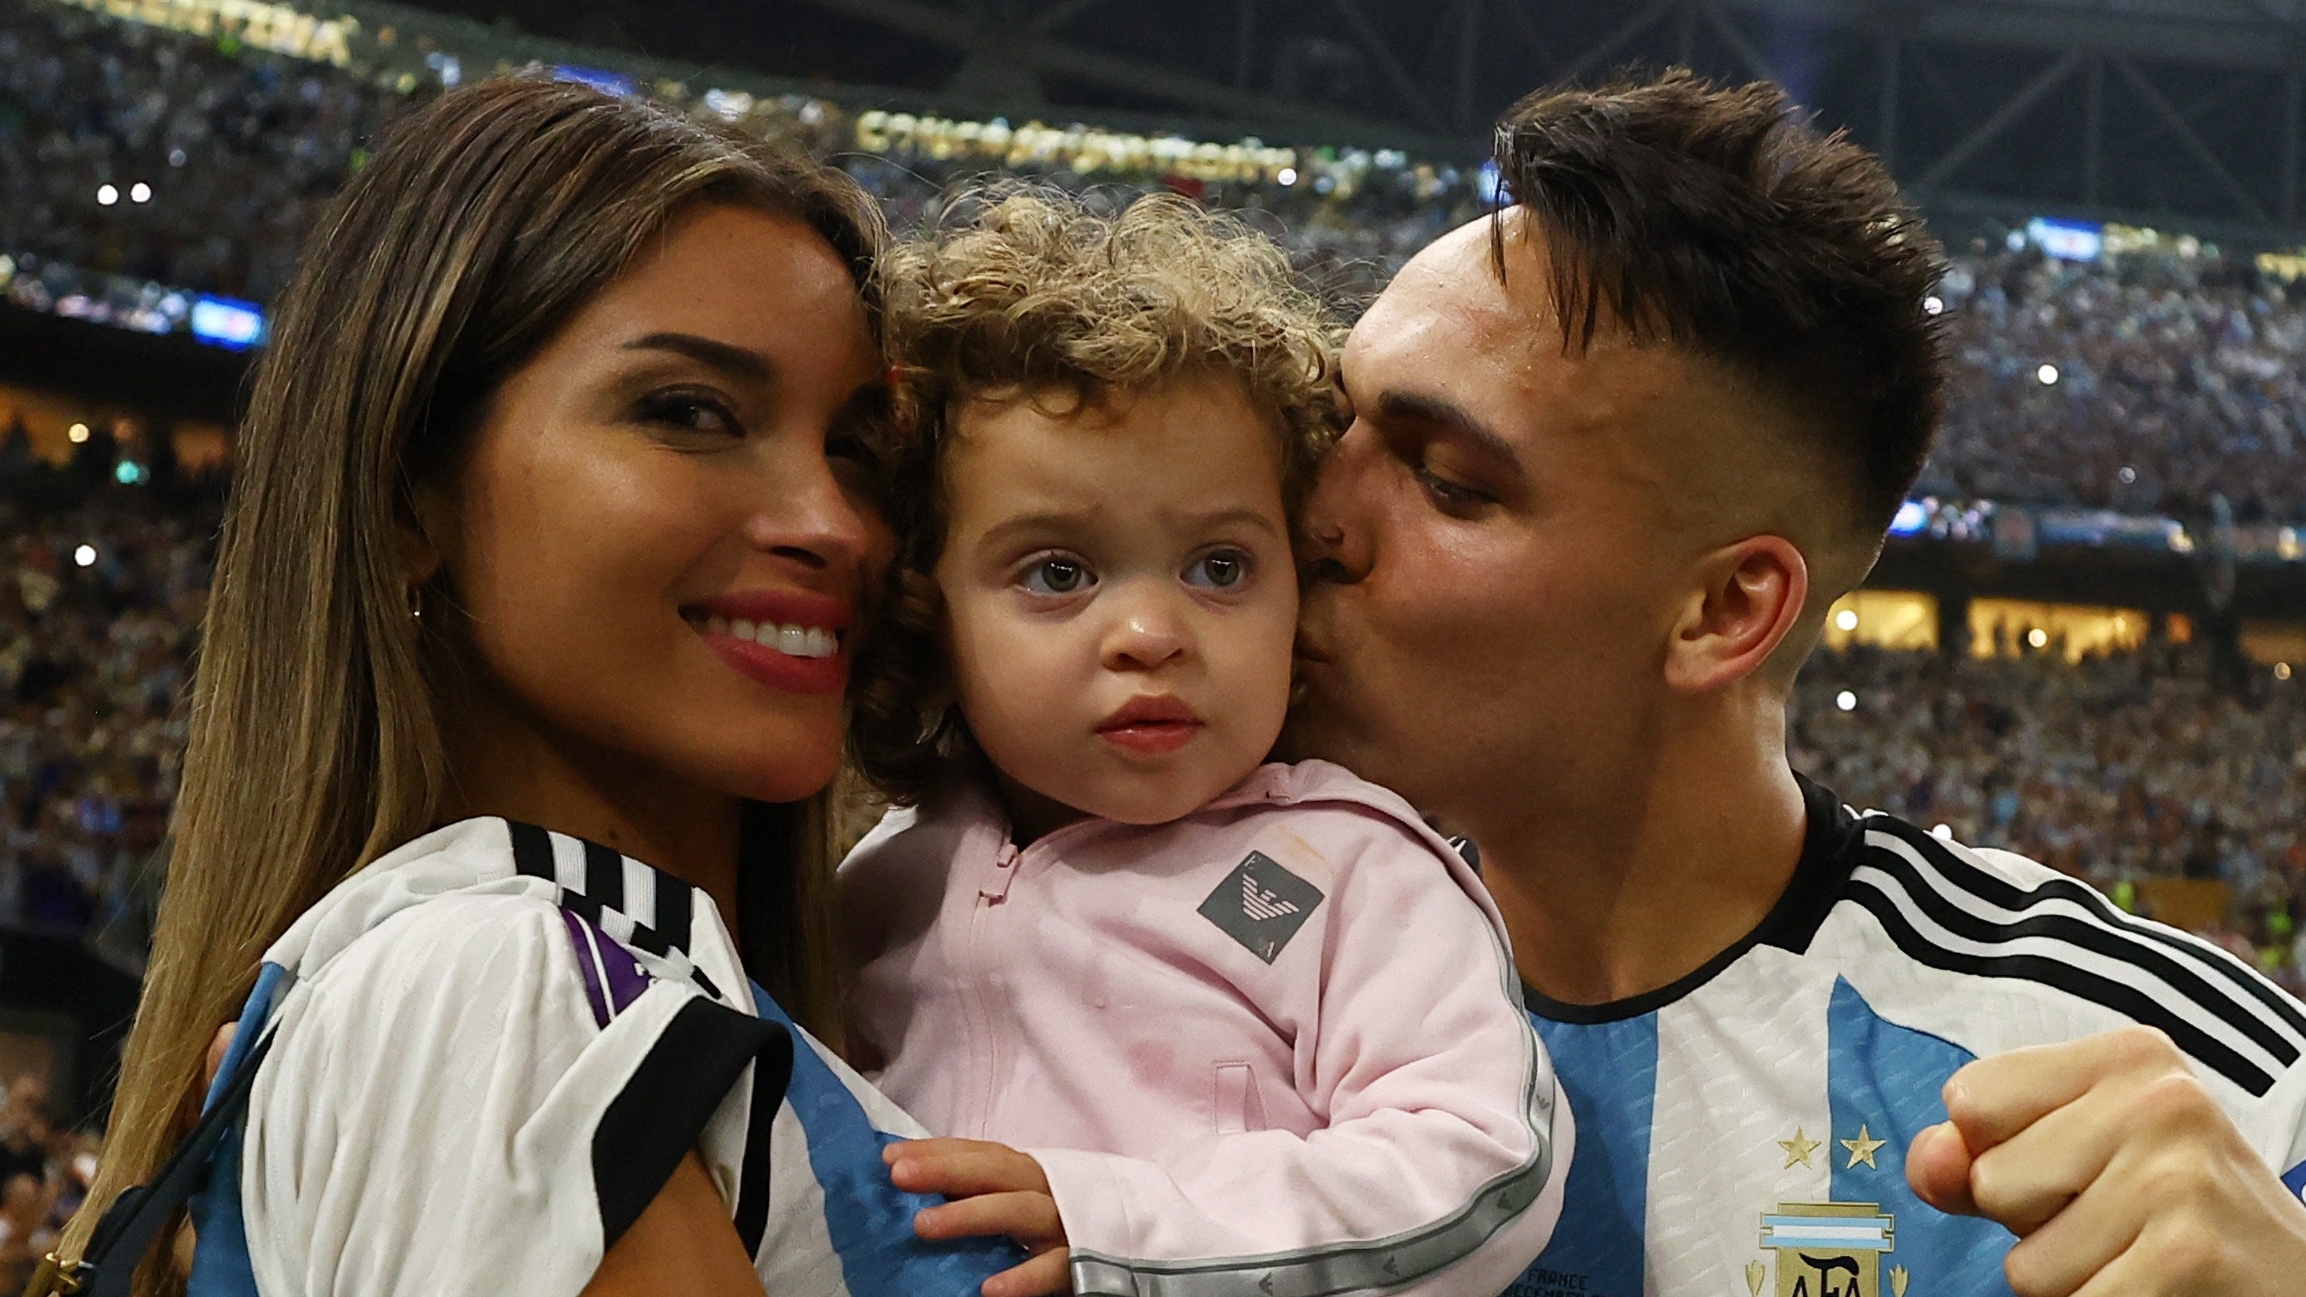 Soccer Football - FIFA World Cup Qatar 2022 - Final - Argentina v France - Lusail Stadium, Lusail, Qatar - December 18, 2022 Argentina's Lautaro Martinez with his partner Agustina Gandolfo after the trophy ceremony REUTERS/Lee Smith